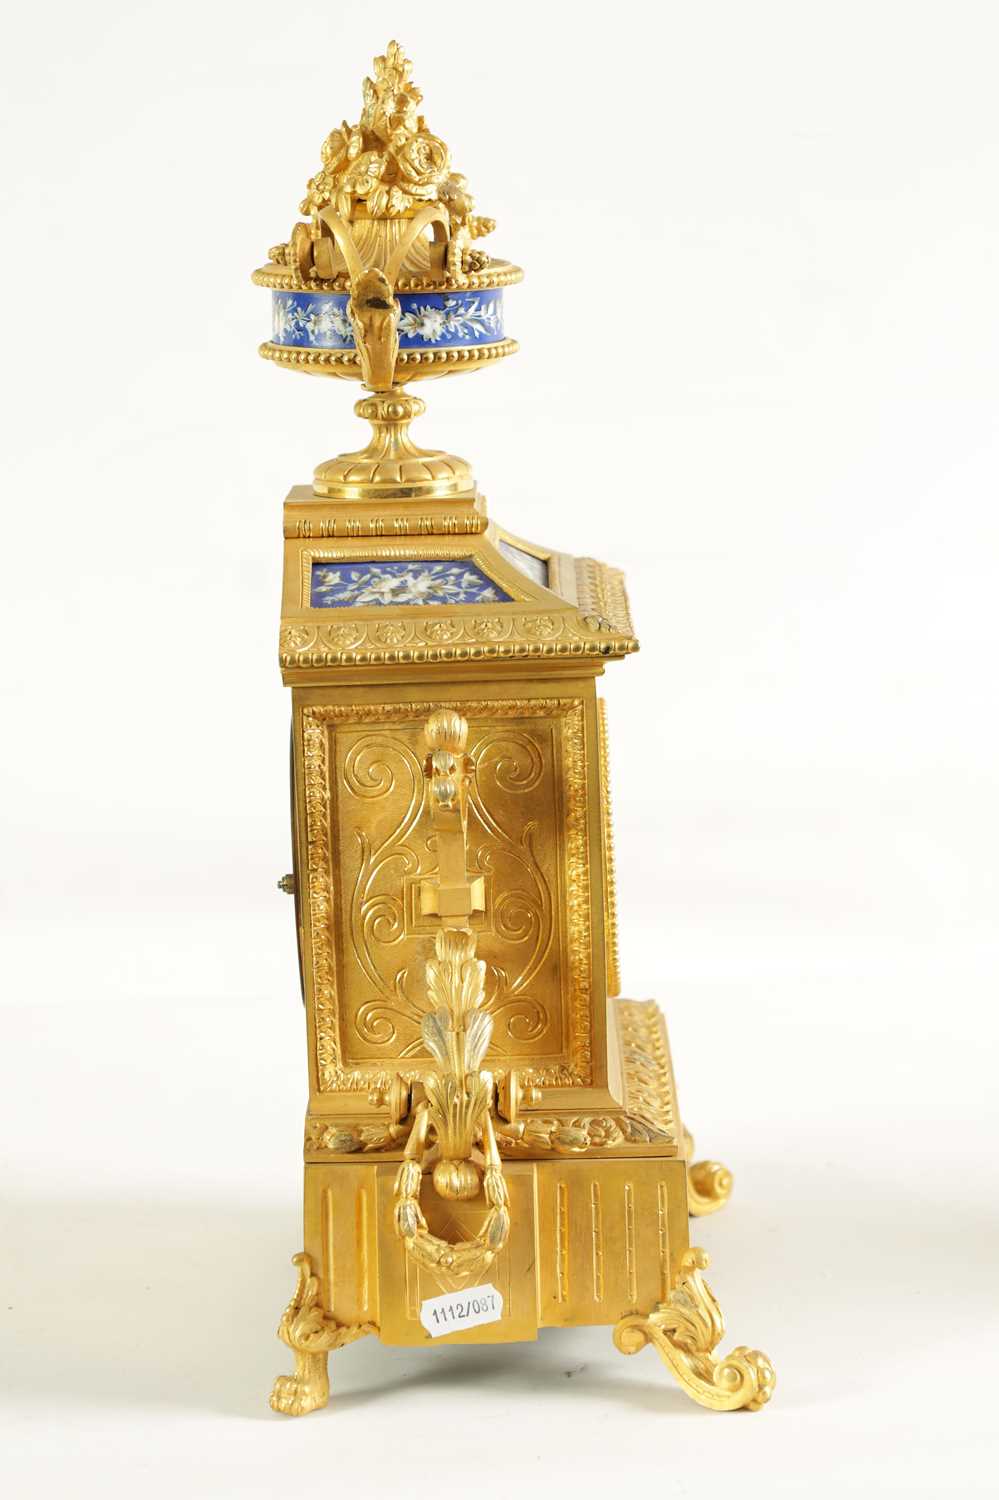 A LATE 19TH CENTURY FRENCH ORMOLU AND PORCELAIN PANELLED MANTEL CLOCK - Image 9 of 9